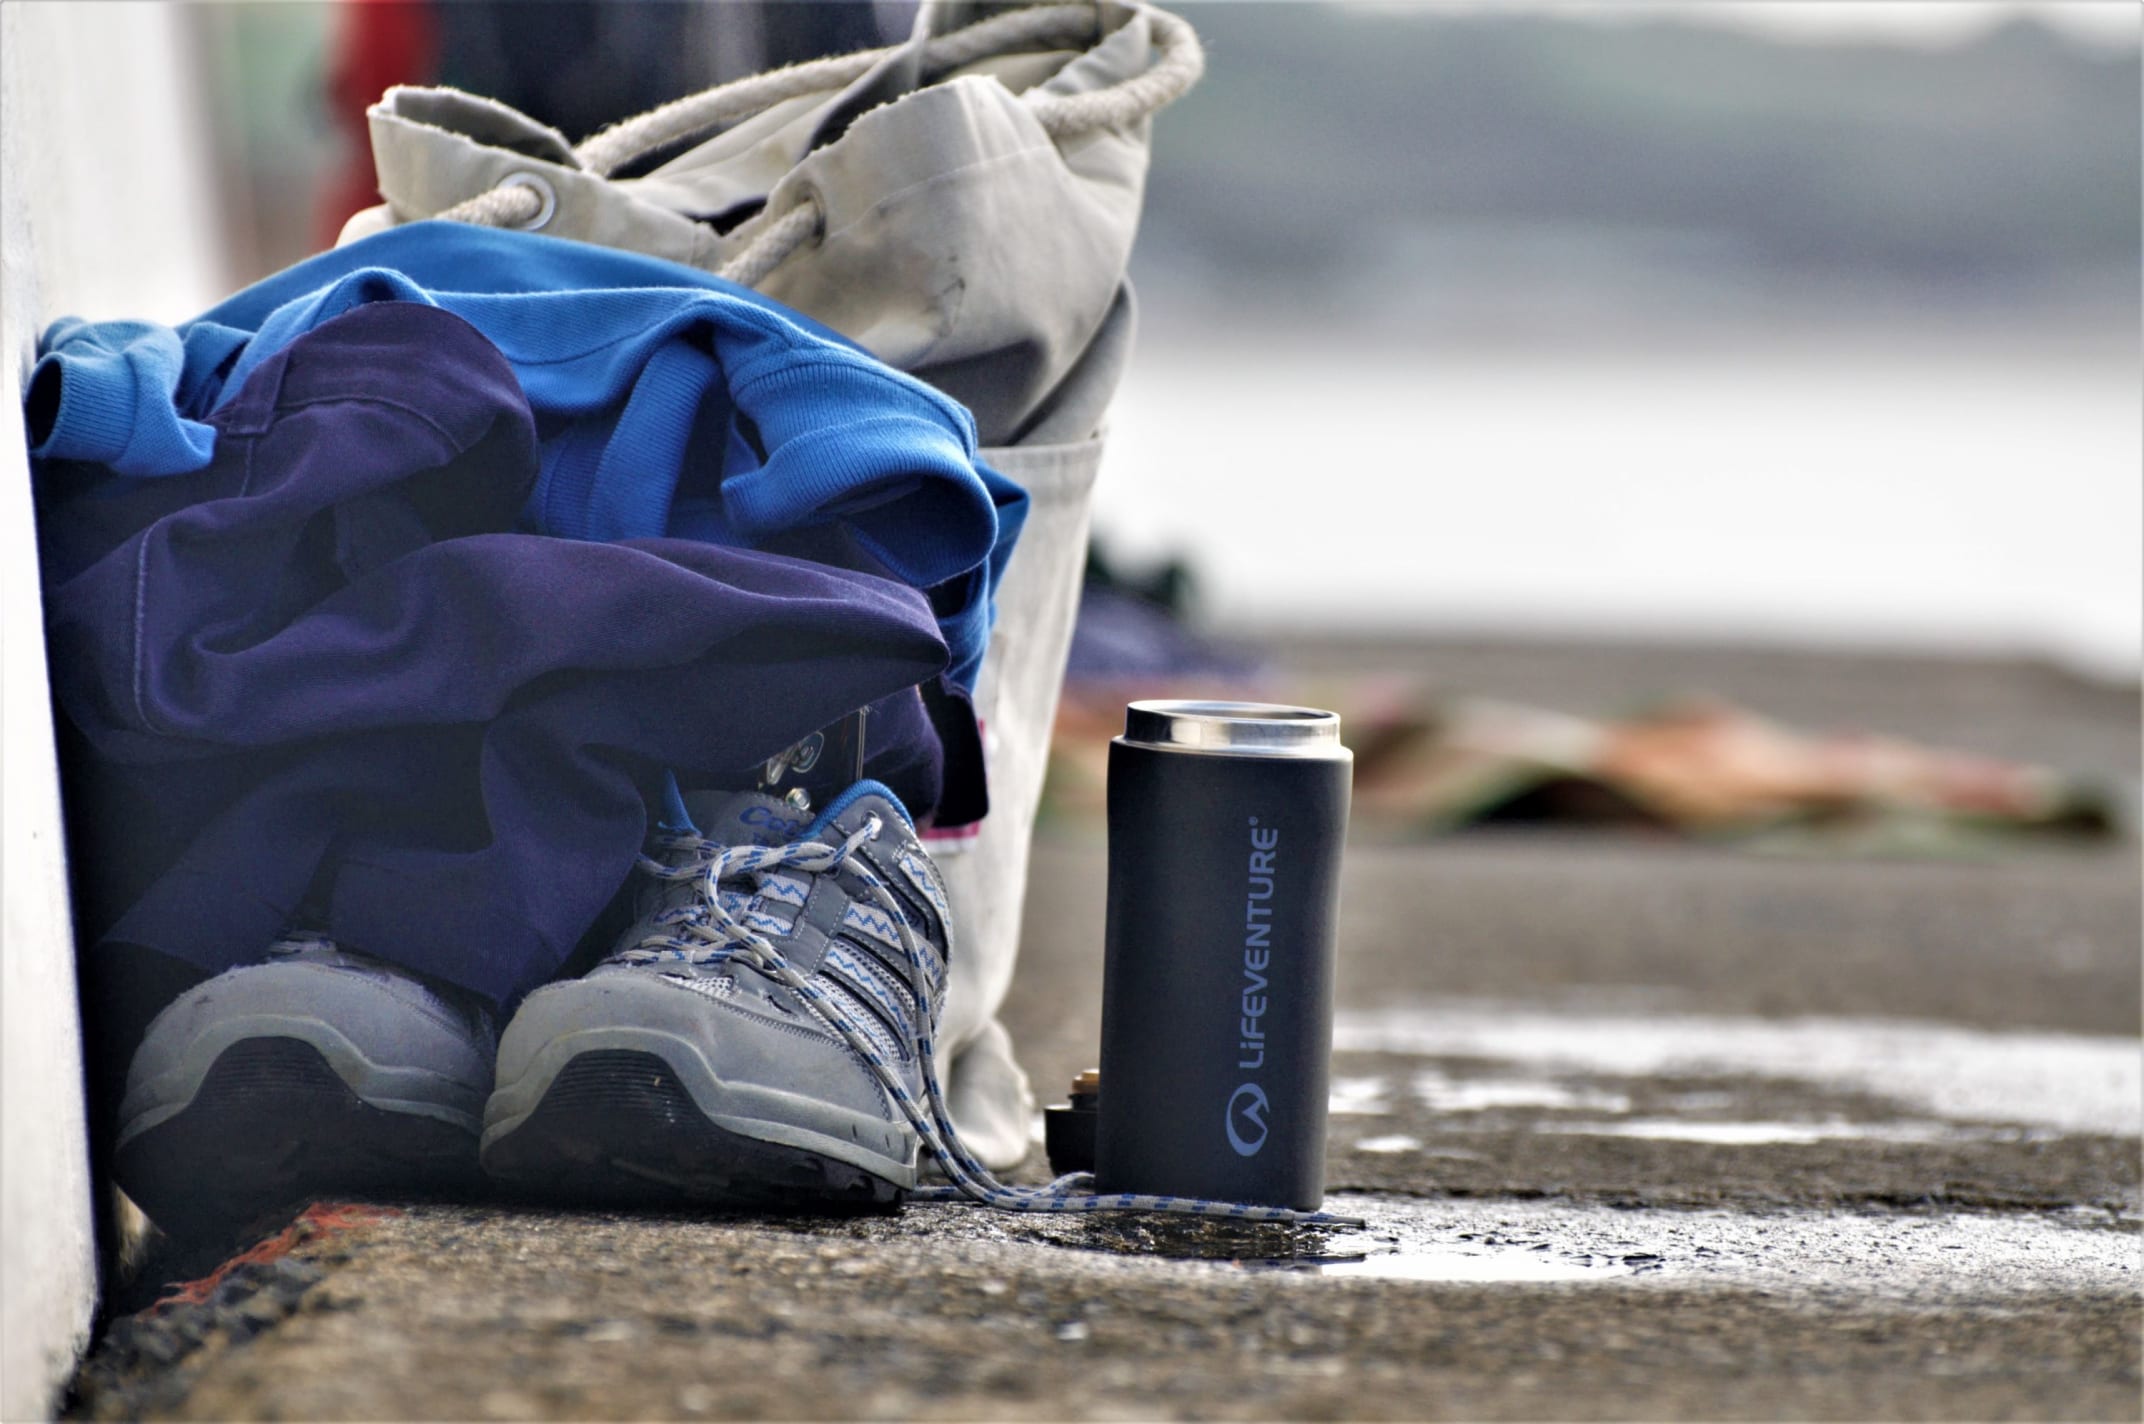 Shoes, clothes and a thermos